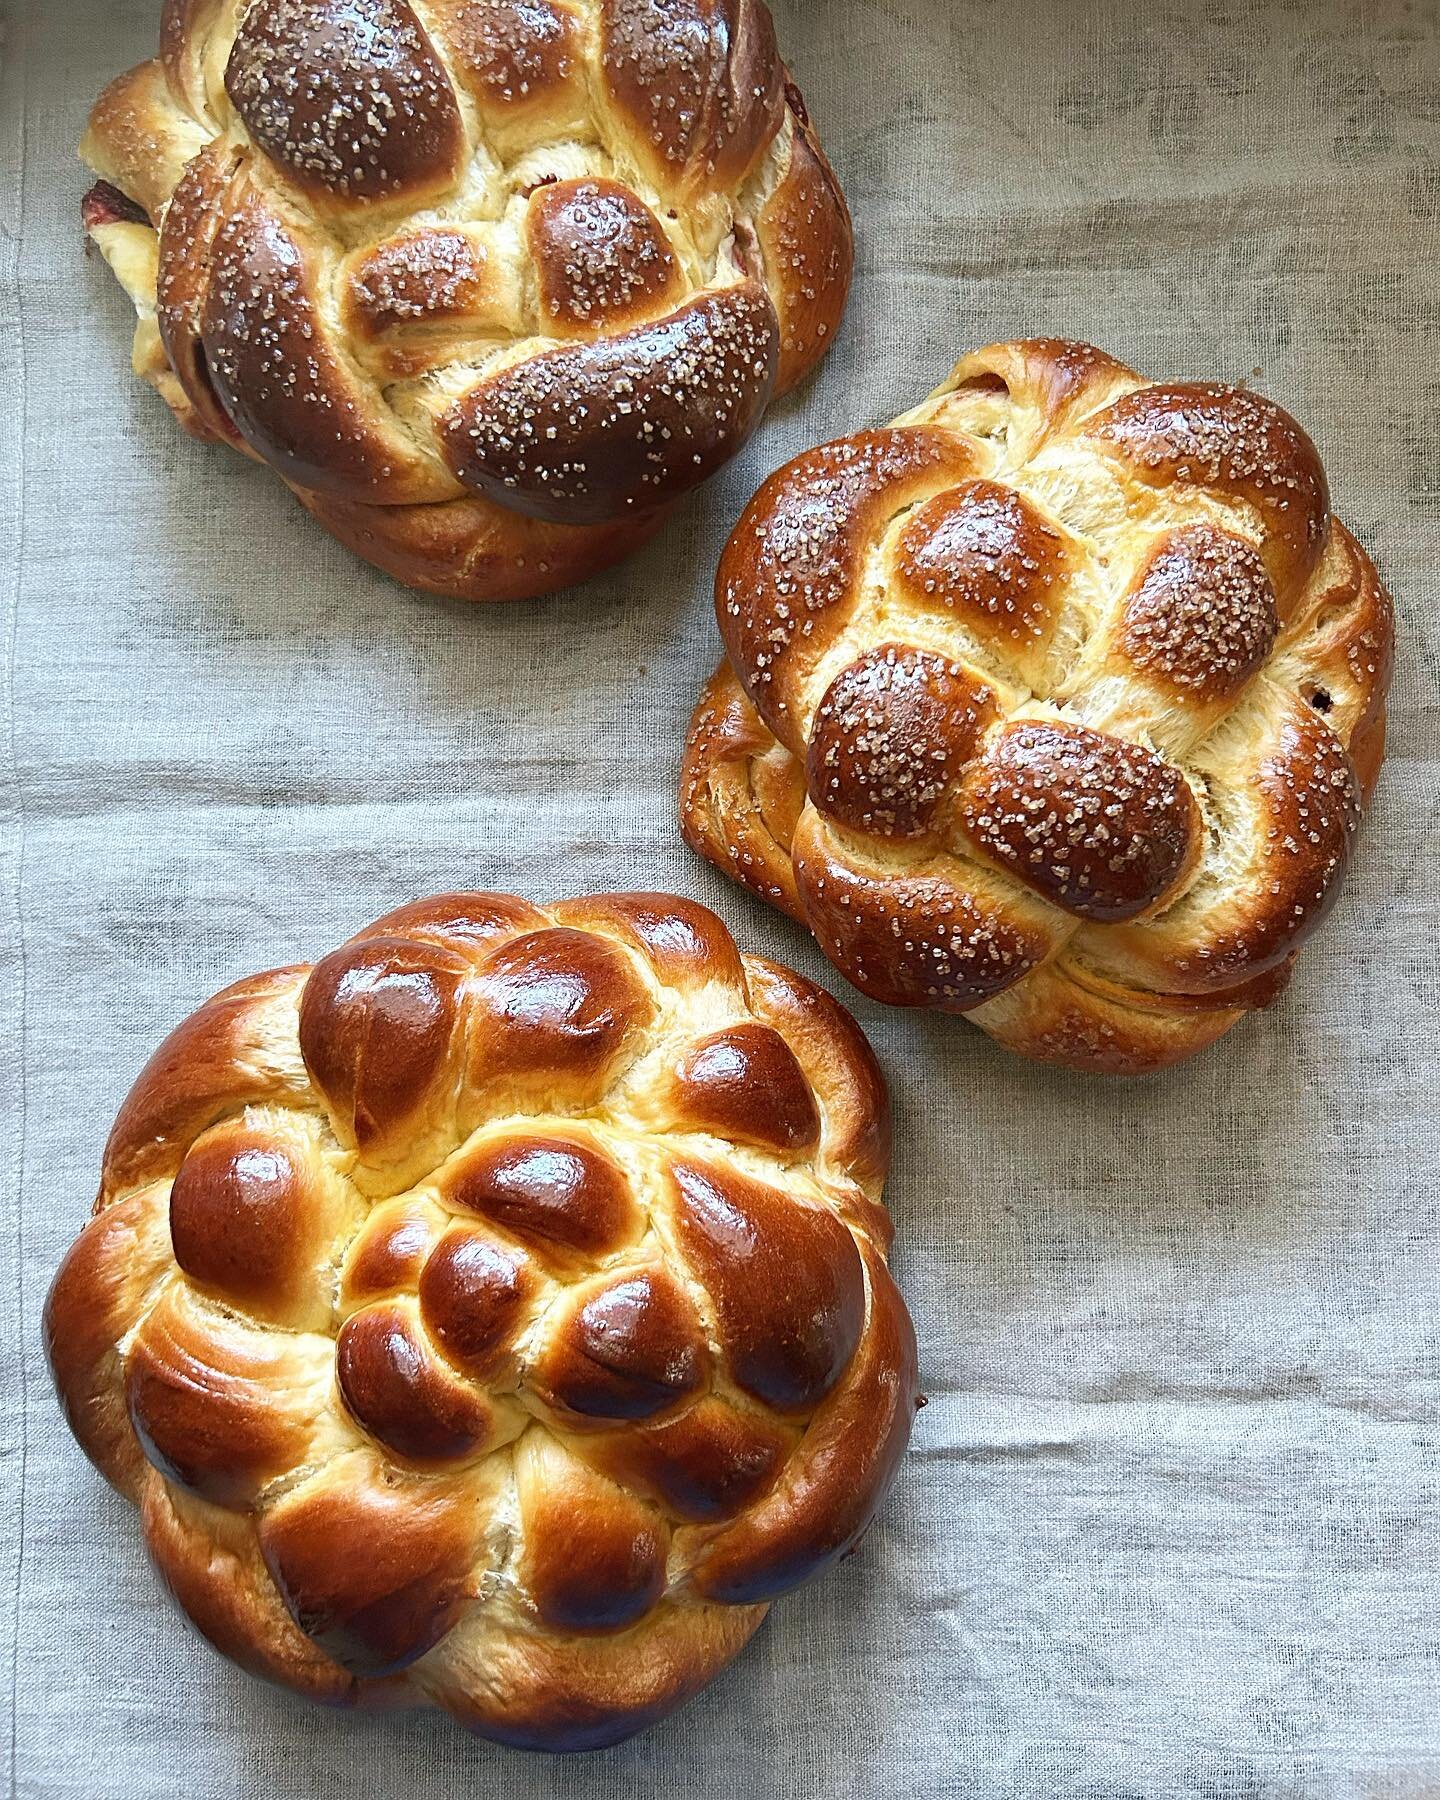 Two plum rosemary challahs and one shiny one for Rosh Hashanah Shabbat. Shanah Tovah! A sweet, joyful, challah-filled new lunar year to all. 🍯🍏🍎